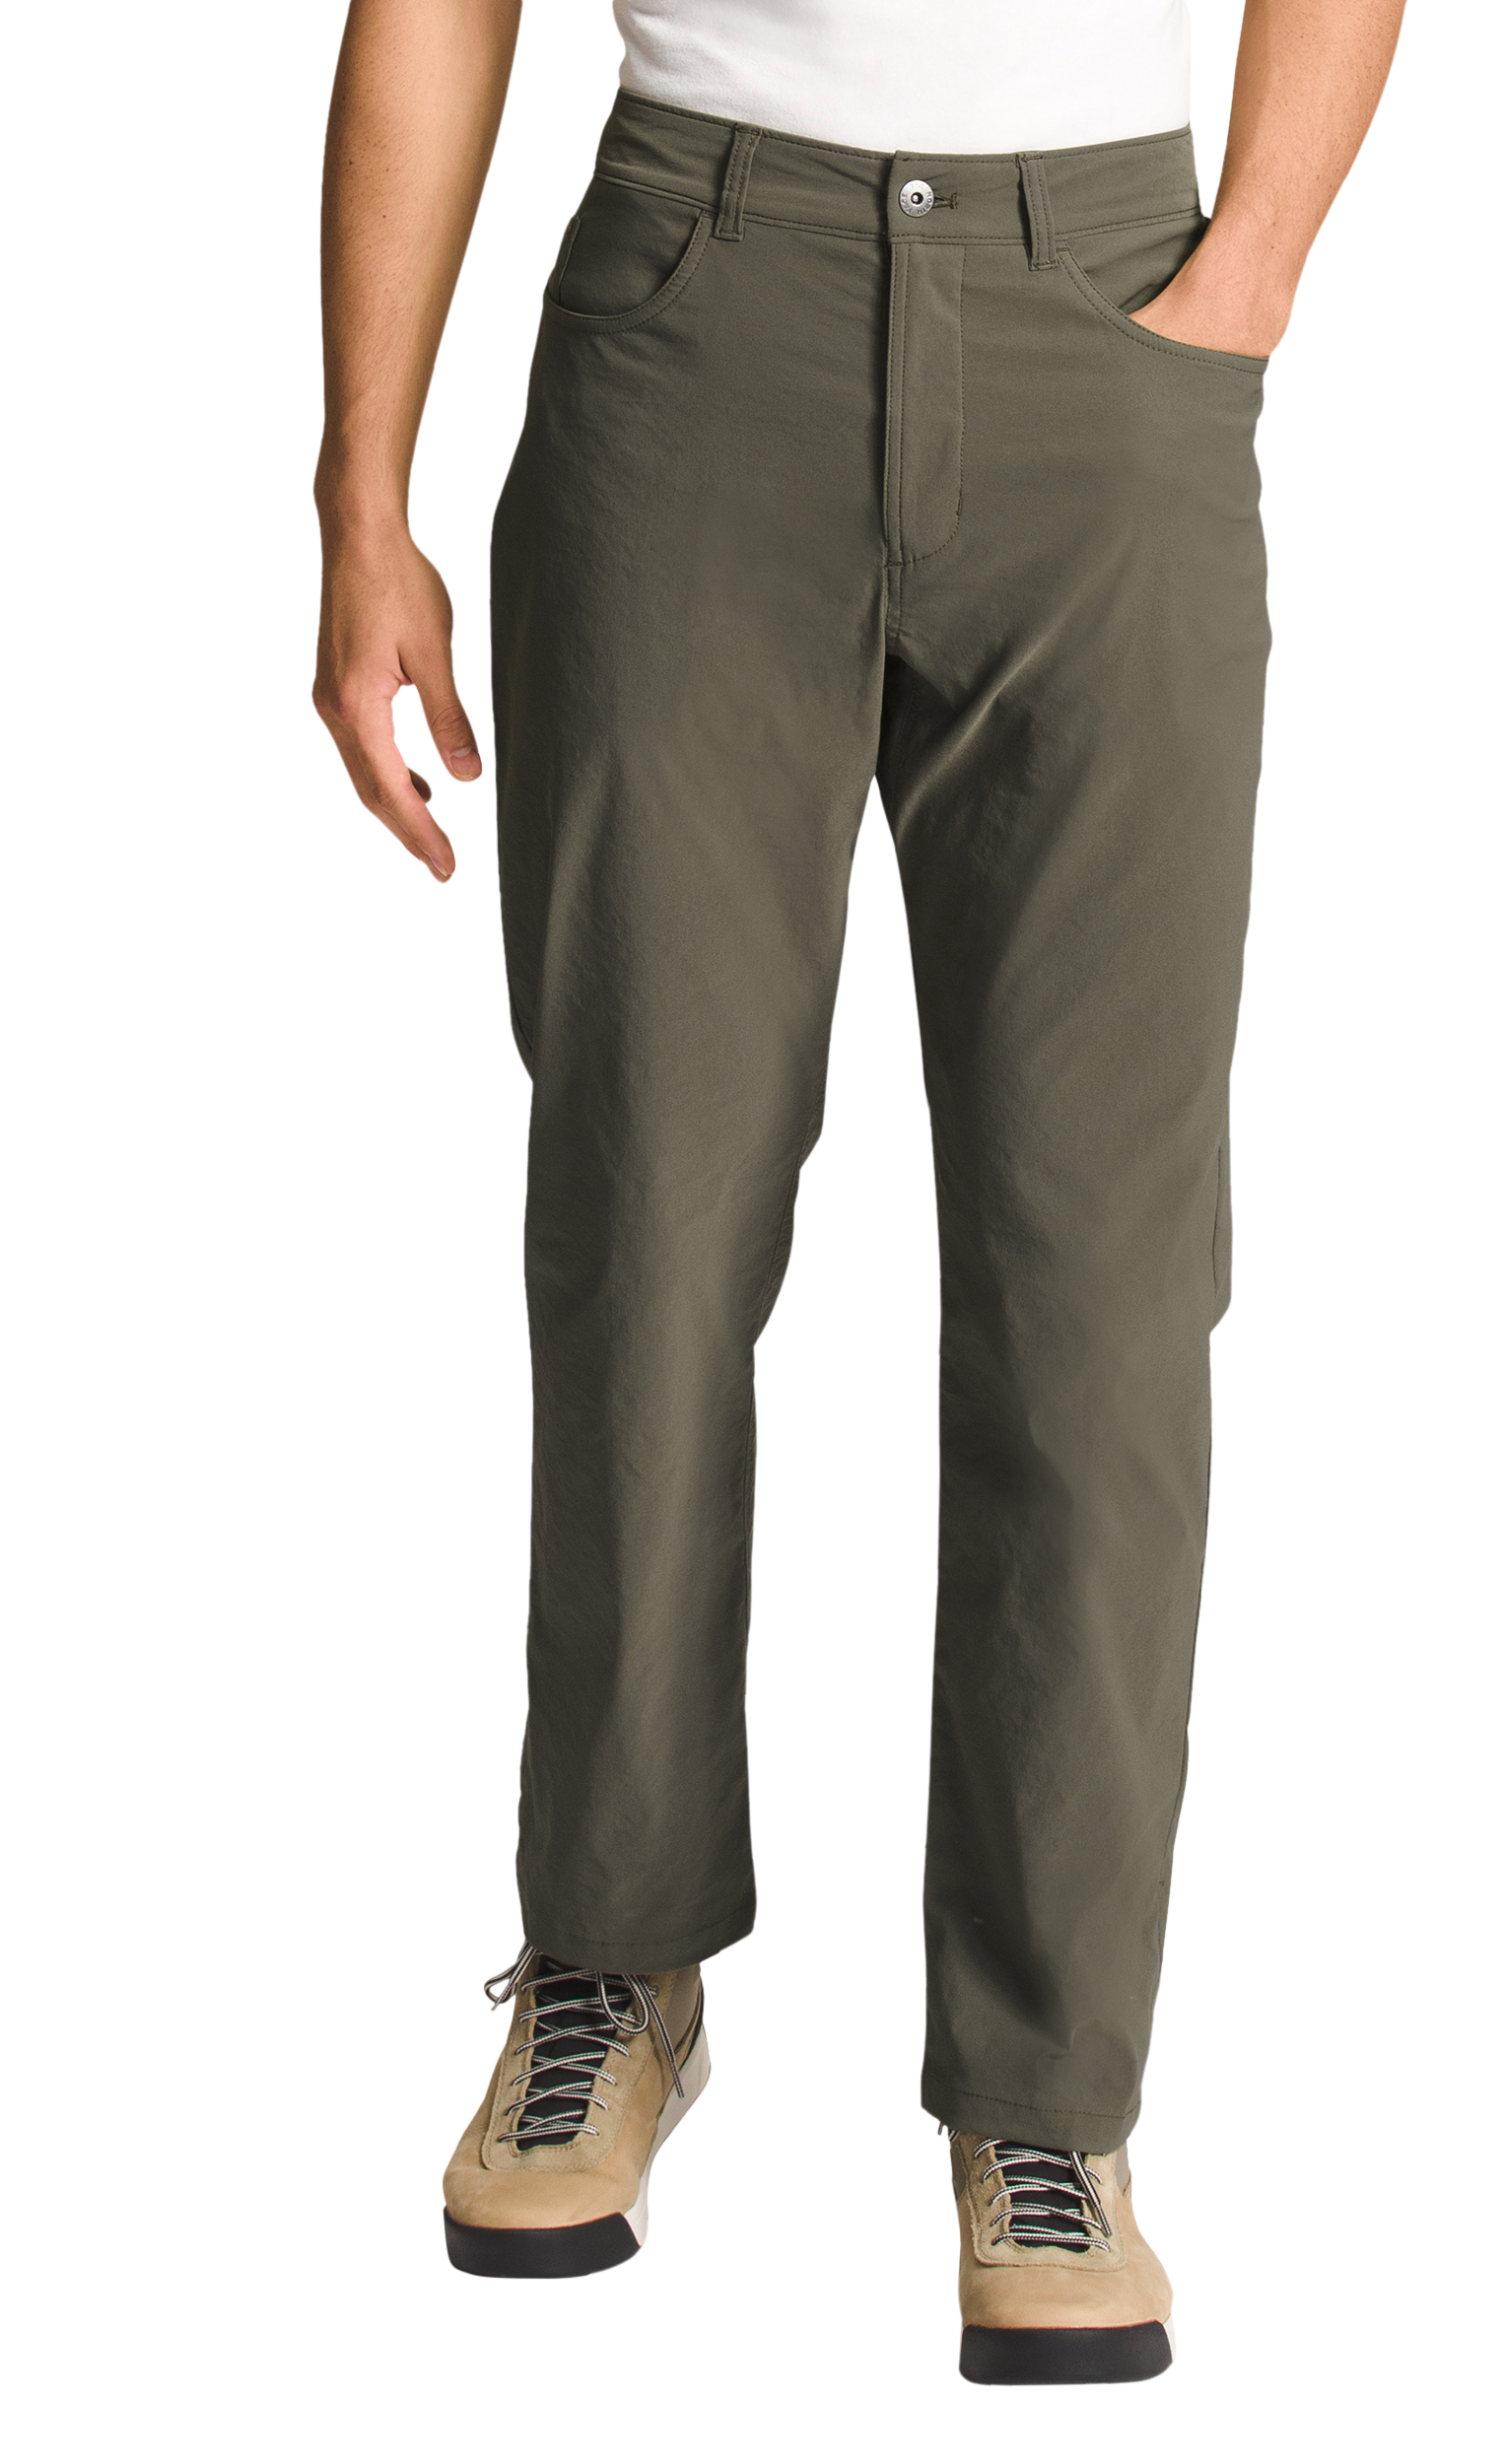 The North Face Sprag 5-Pocket Pants for Men - New Taupe Green - 30x31